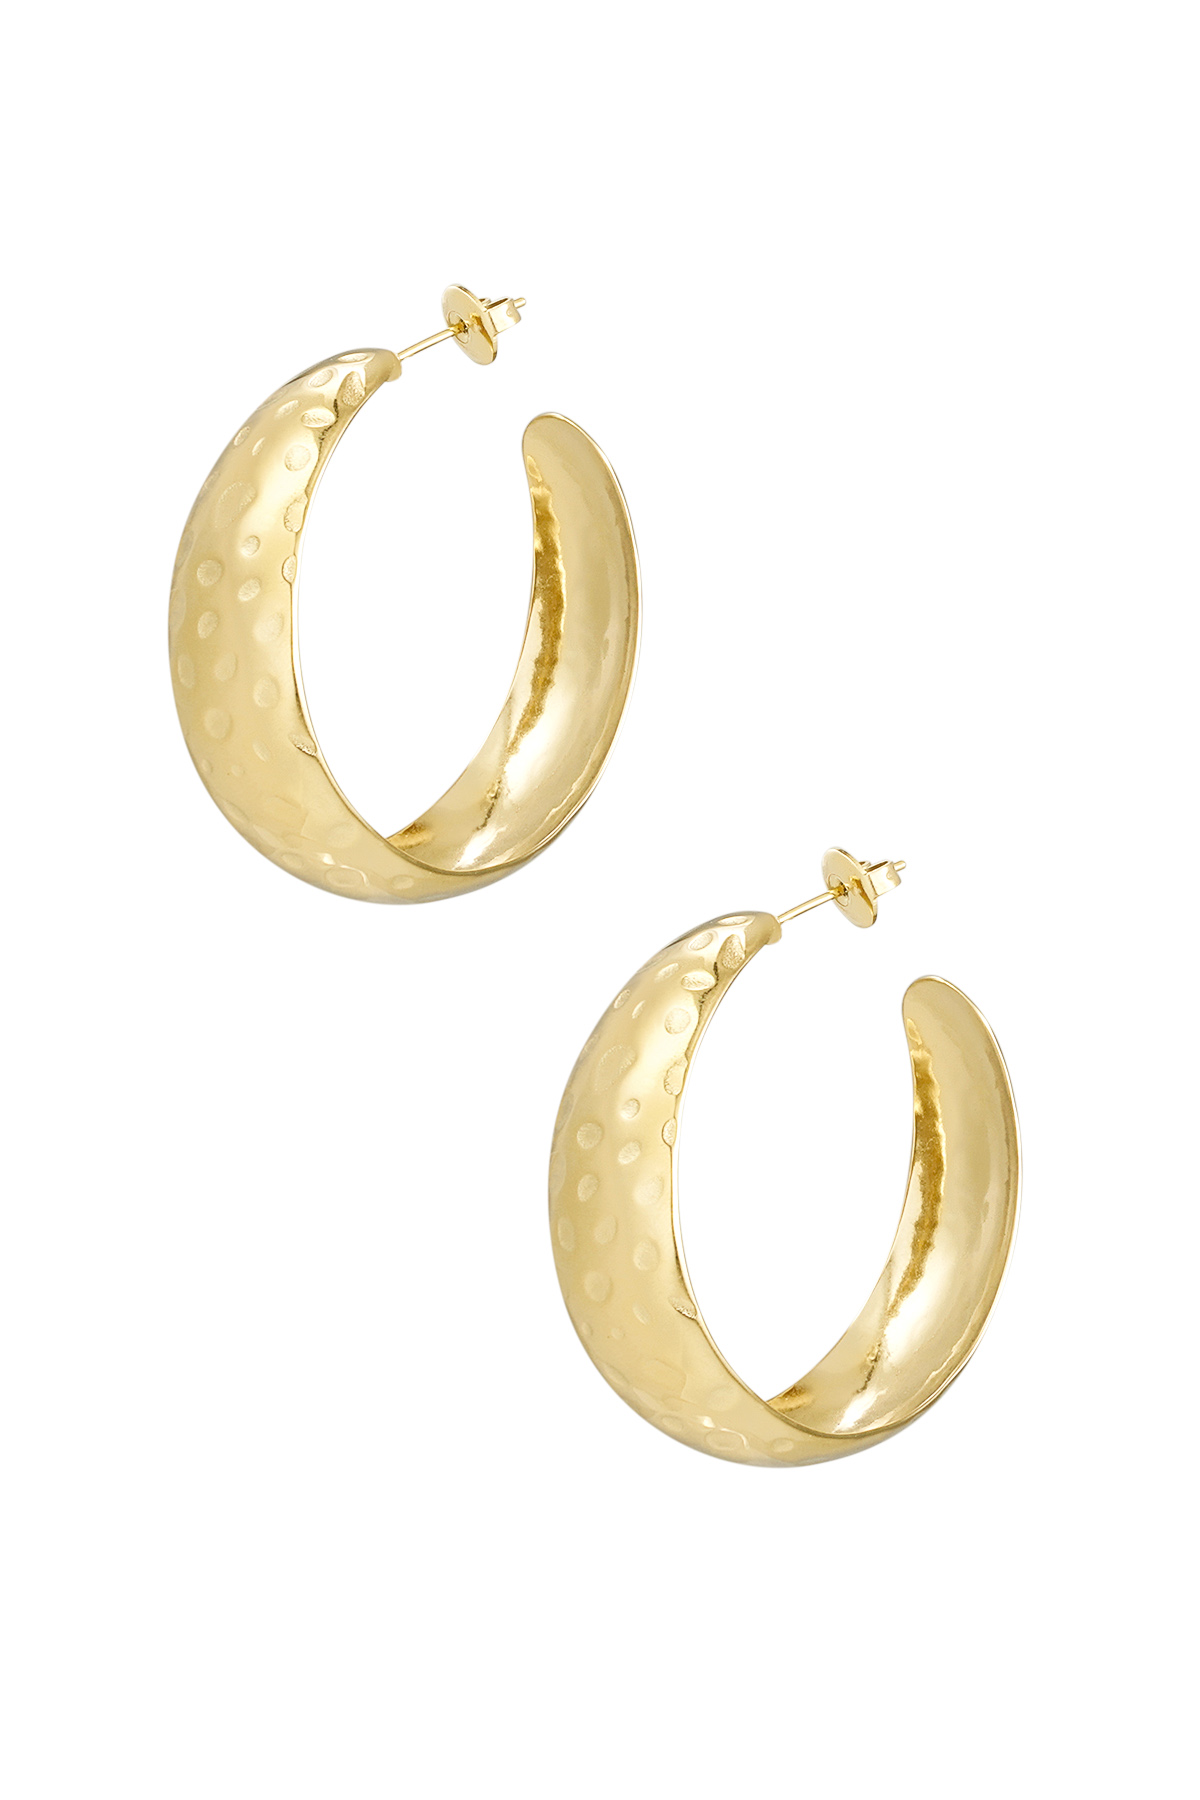 Earrings bubbly structure - gold 